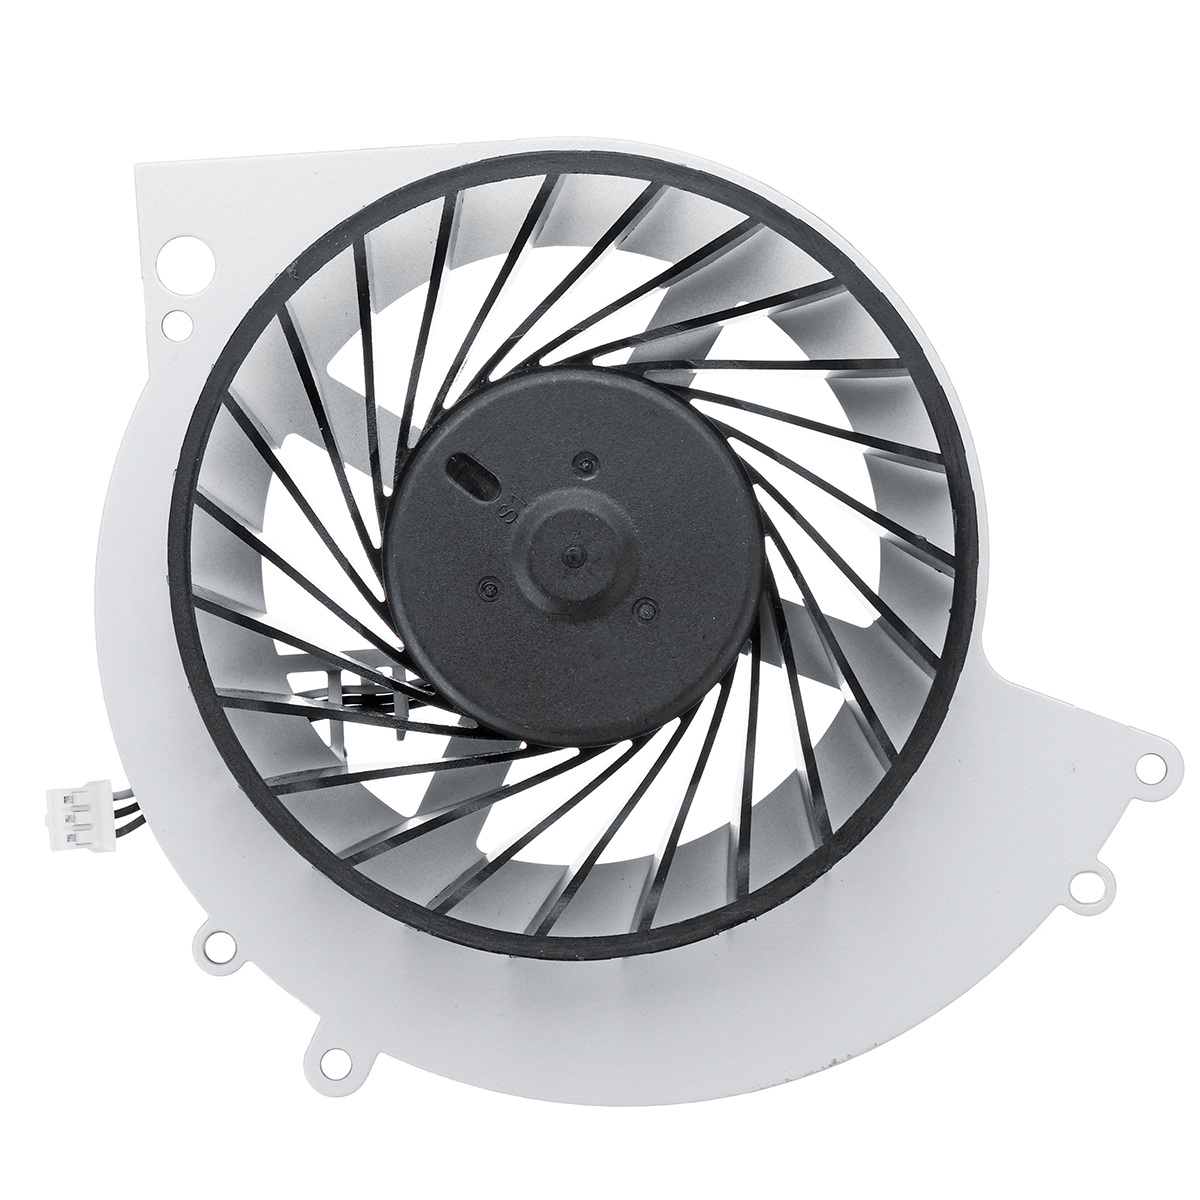 

Replacement Internal Cooling Fan Built-in Cooler for Sony PS4 for Playstation 4 1200 Cooling Fan